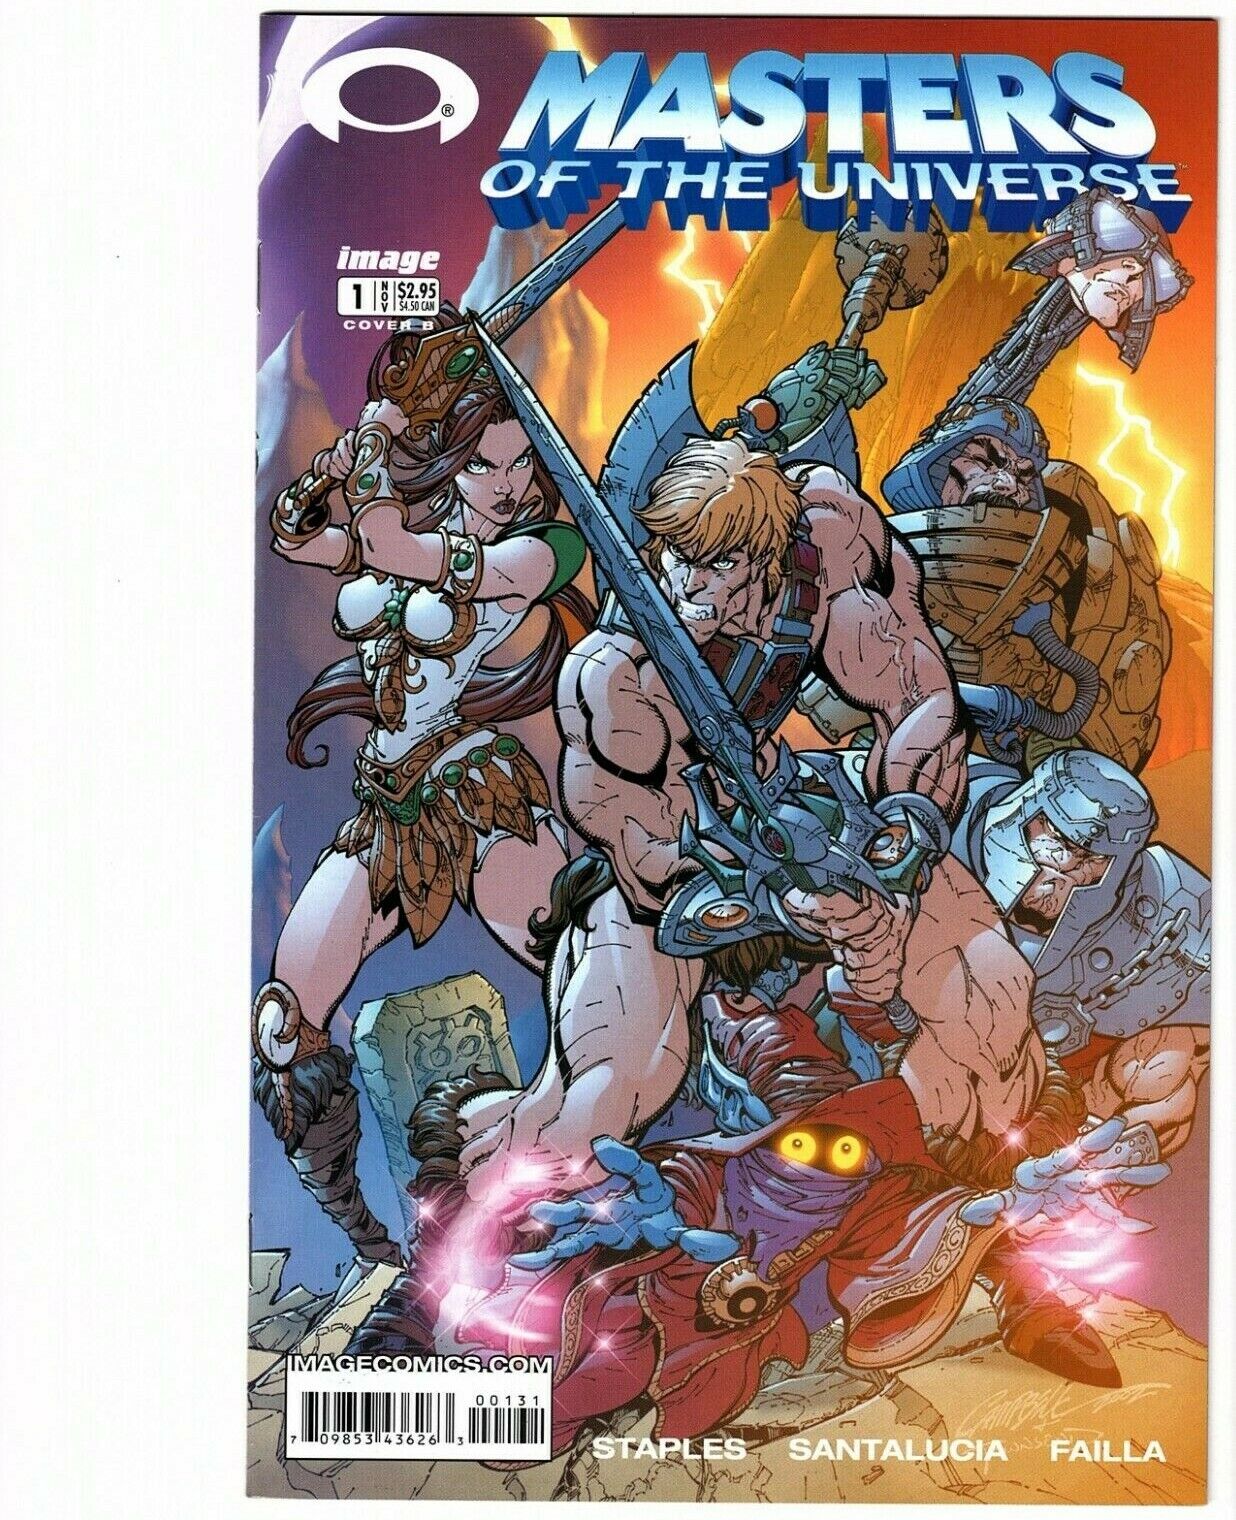 Masters of the Universe # 1 (Image)2002  NM-  VARIANT COVER B -- NEWSSTAND